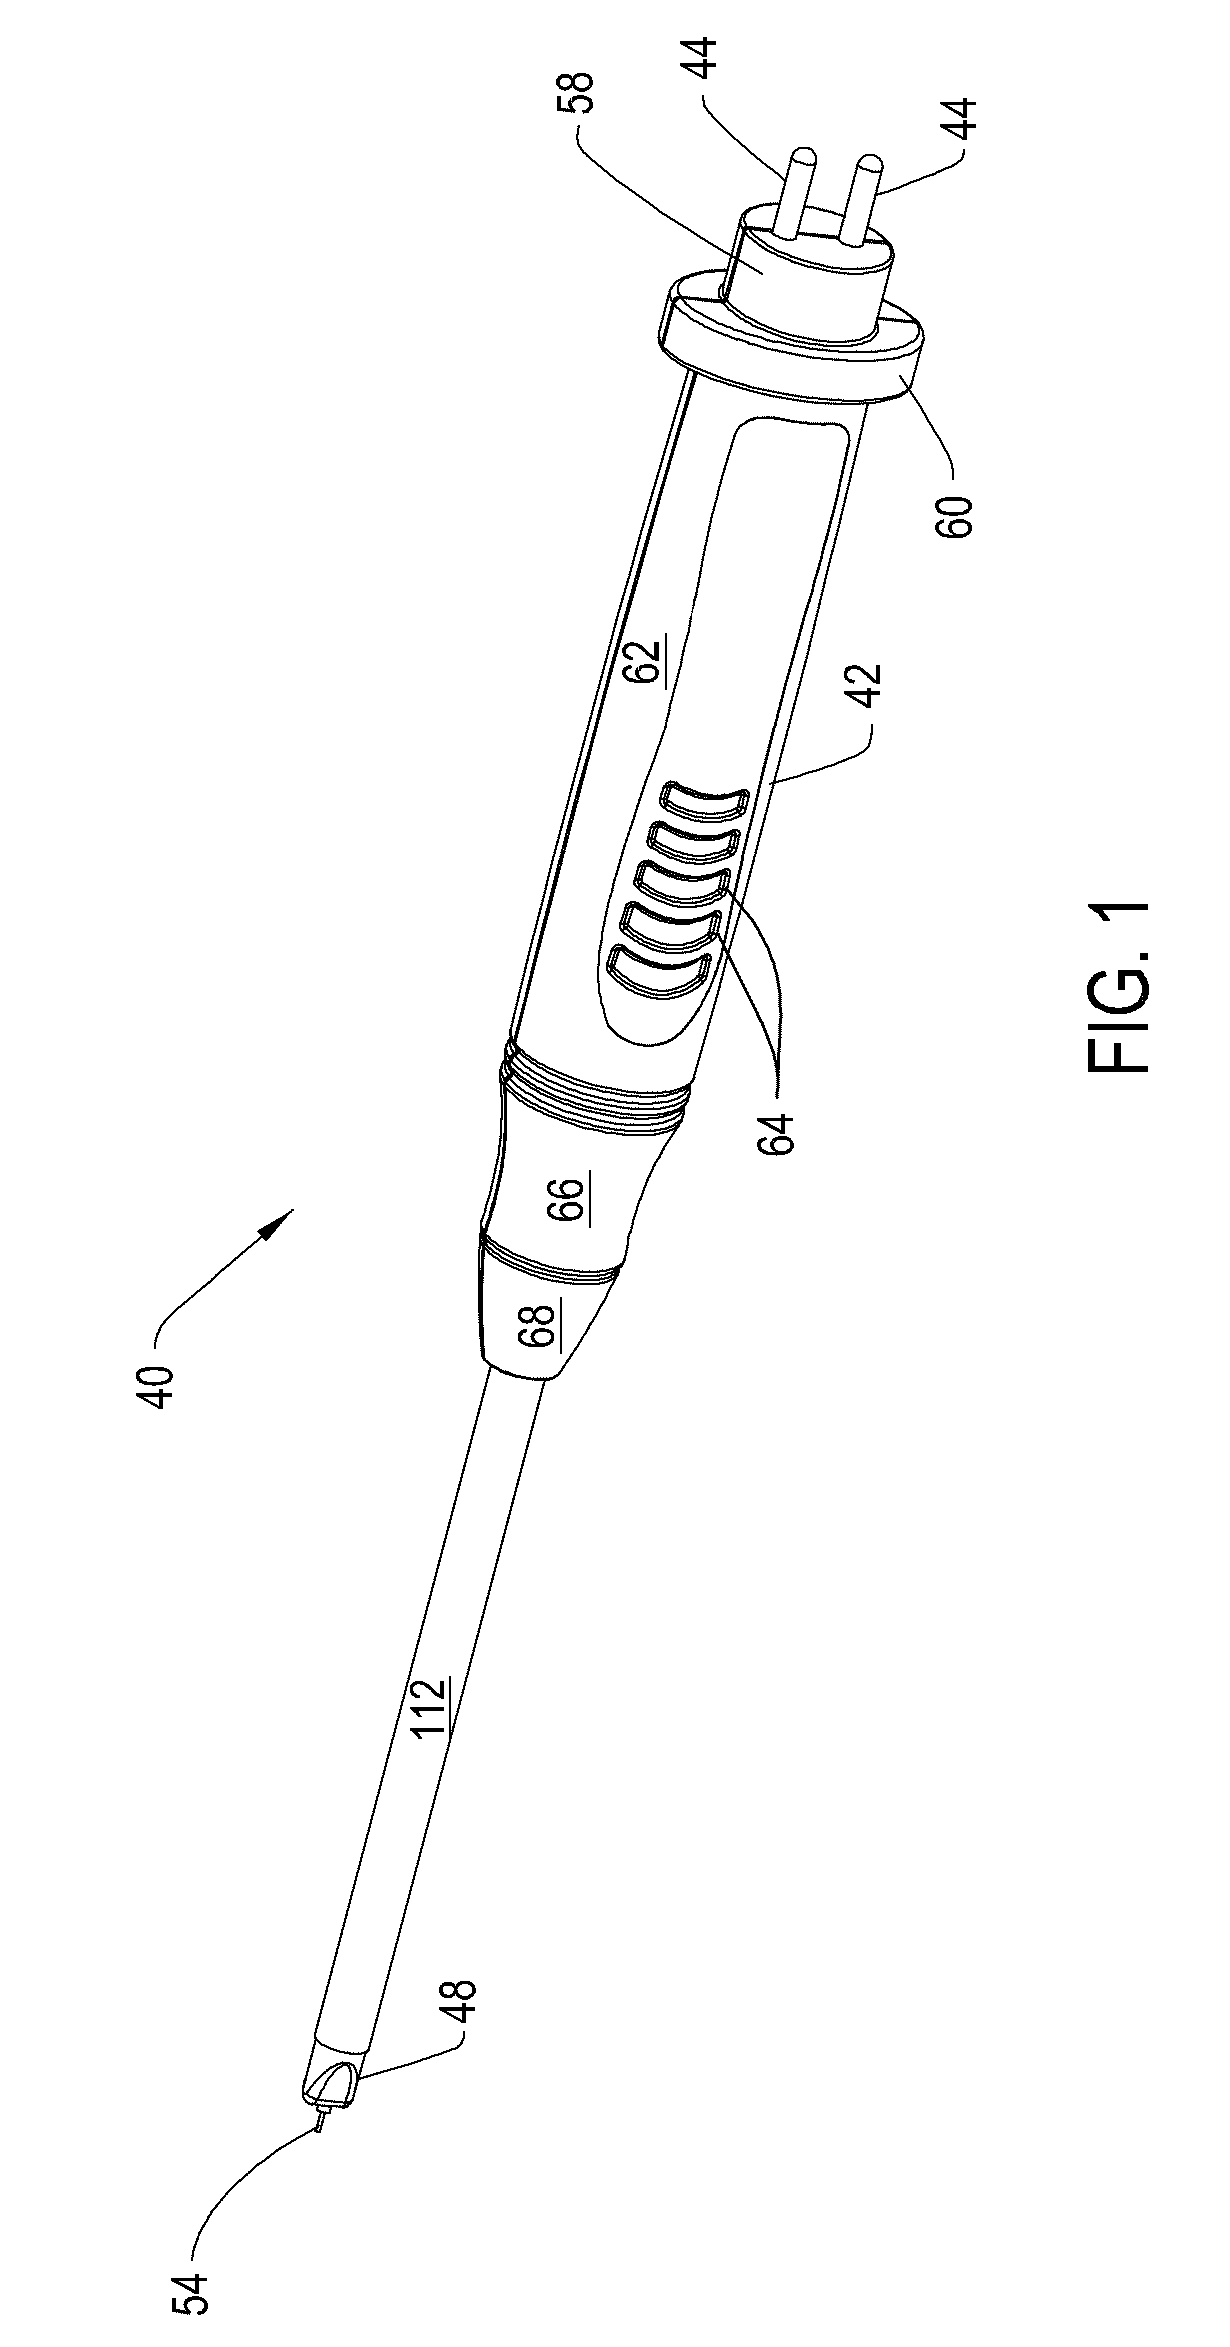 Bipolar electrosurgical tool with active and return electrodes shaped to foster diffuse current flow in the tissue adjacent the return electrode